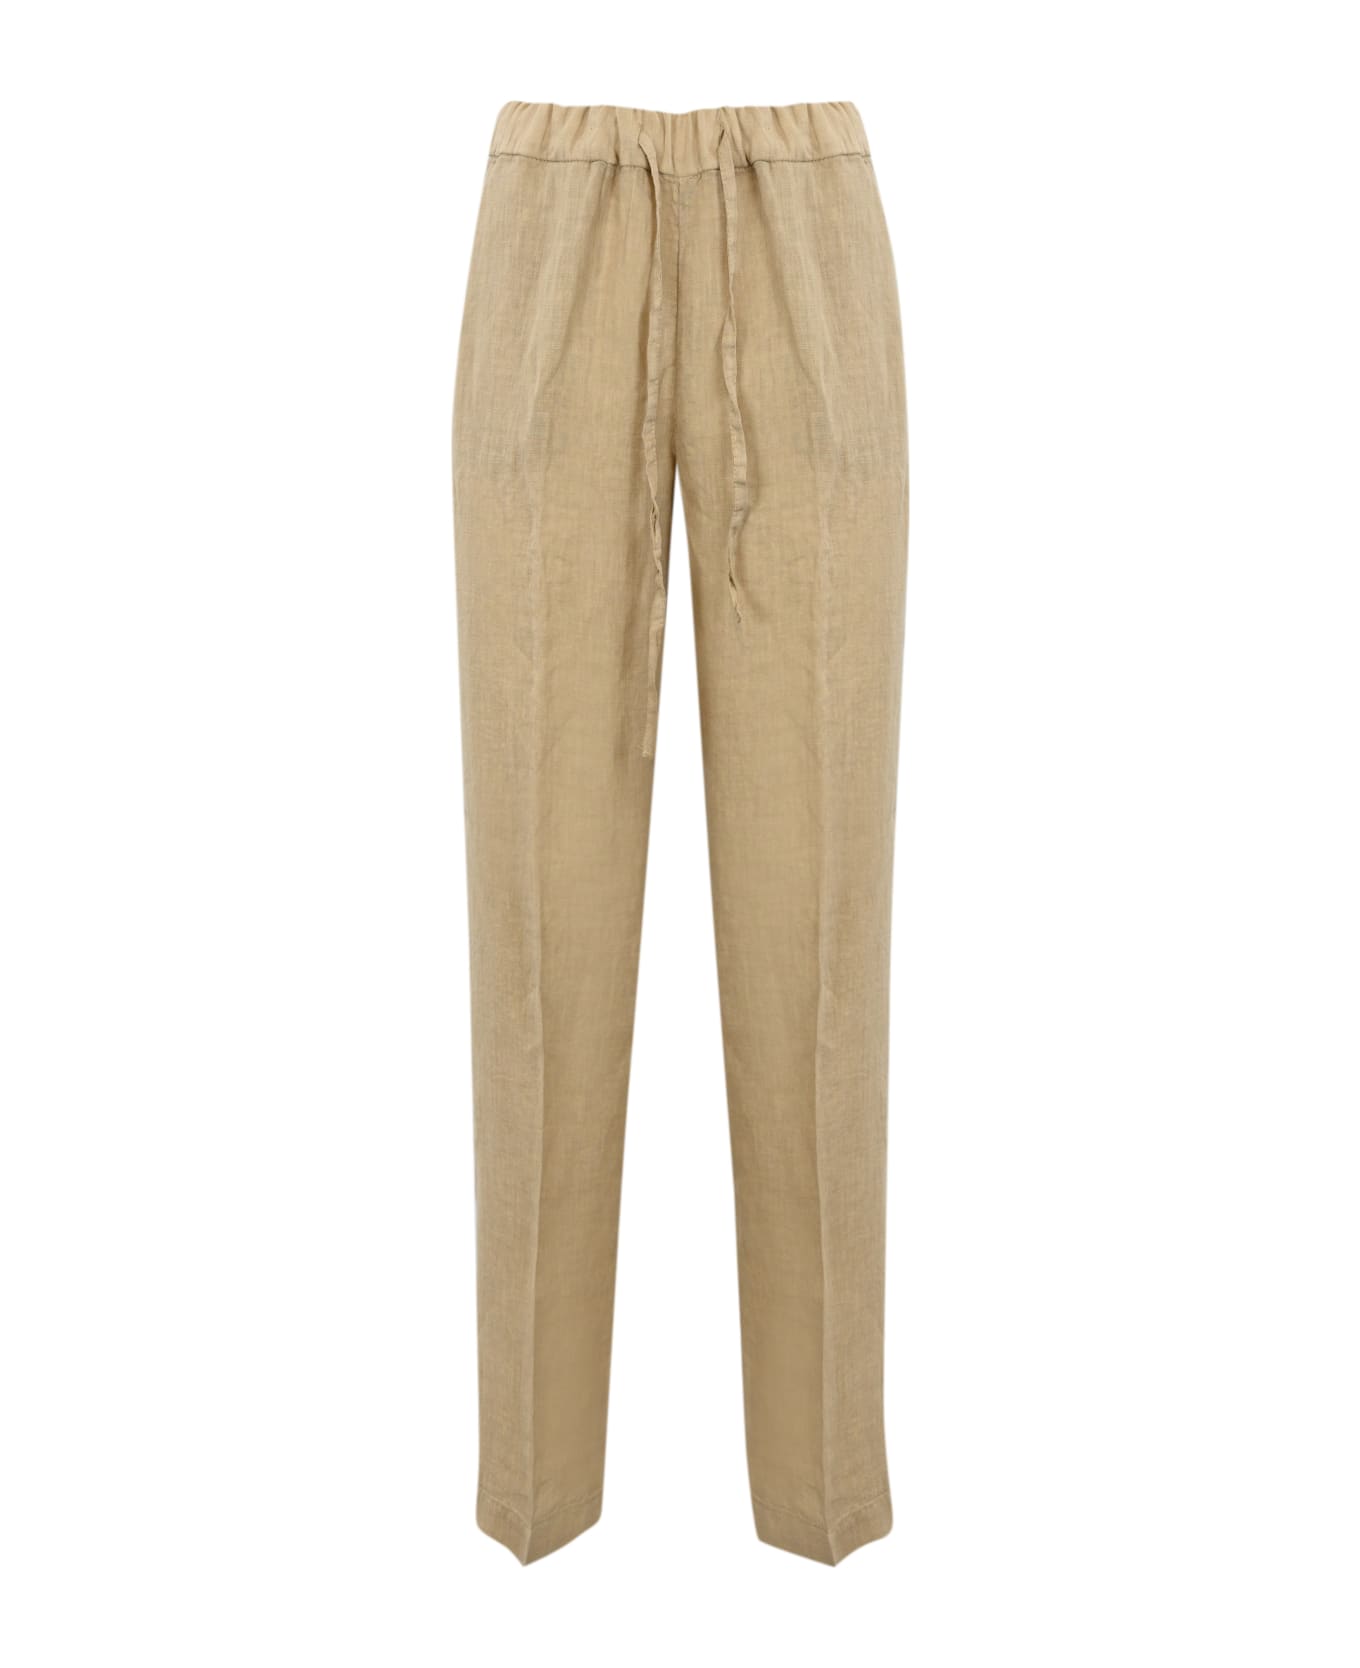 Re-HasH Linen Palazzo Trousers - Beige ボトムス